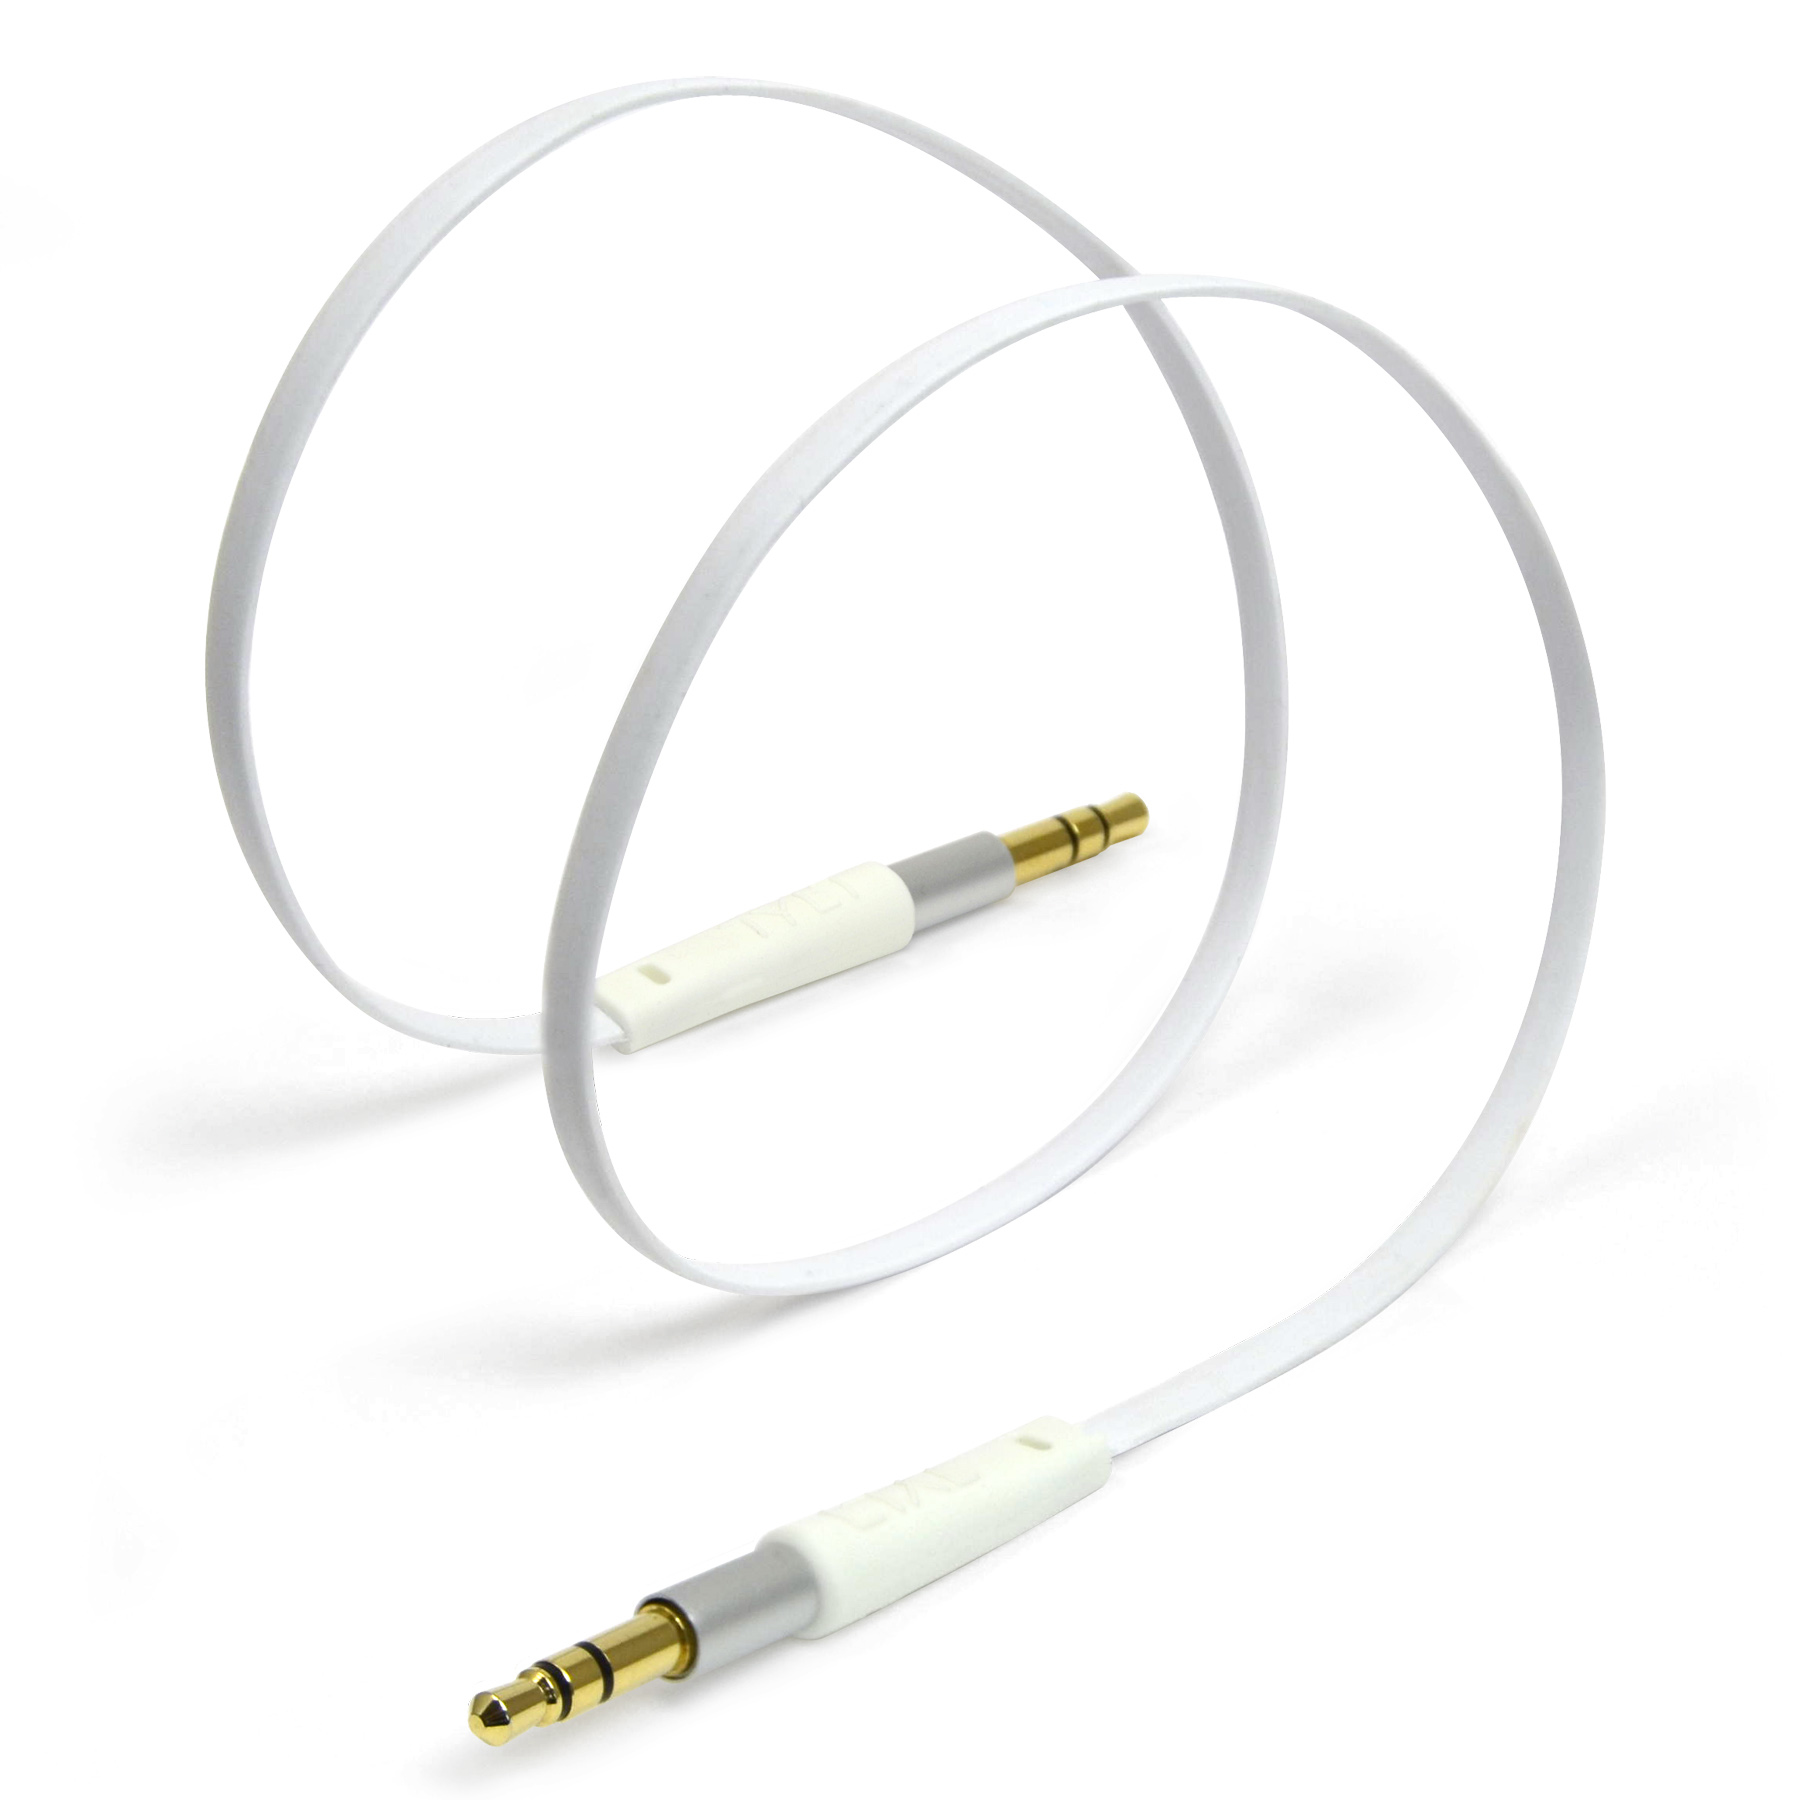 Tylt Stereo Auxiliary 3.5mm Cable White